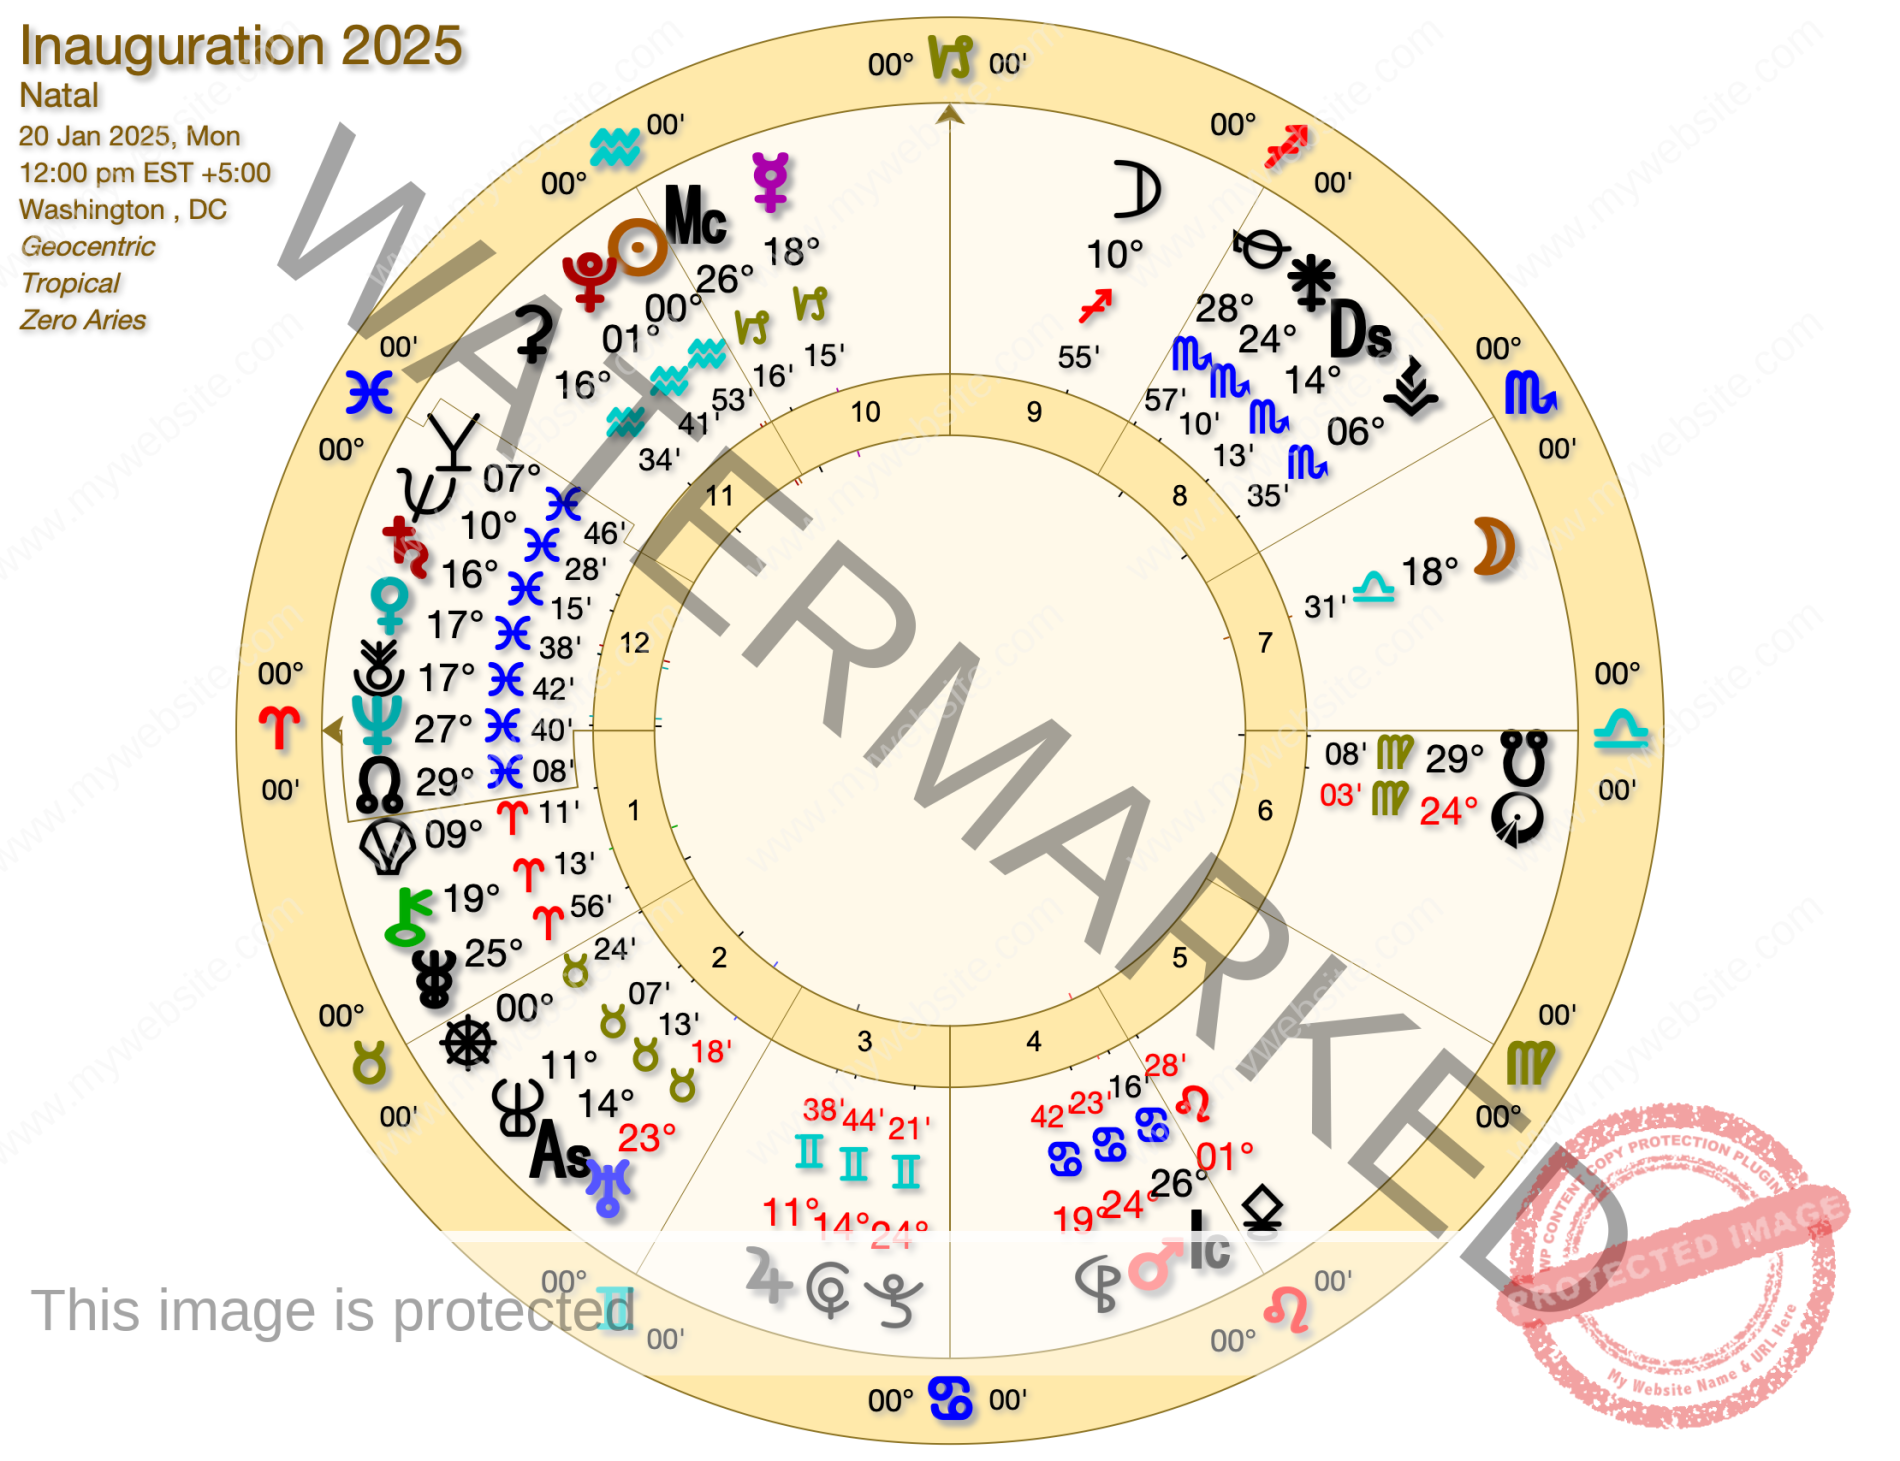 US Election 2025 Inauguration - Astrology Predicts the 2025 US President